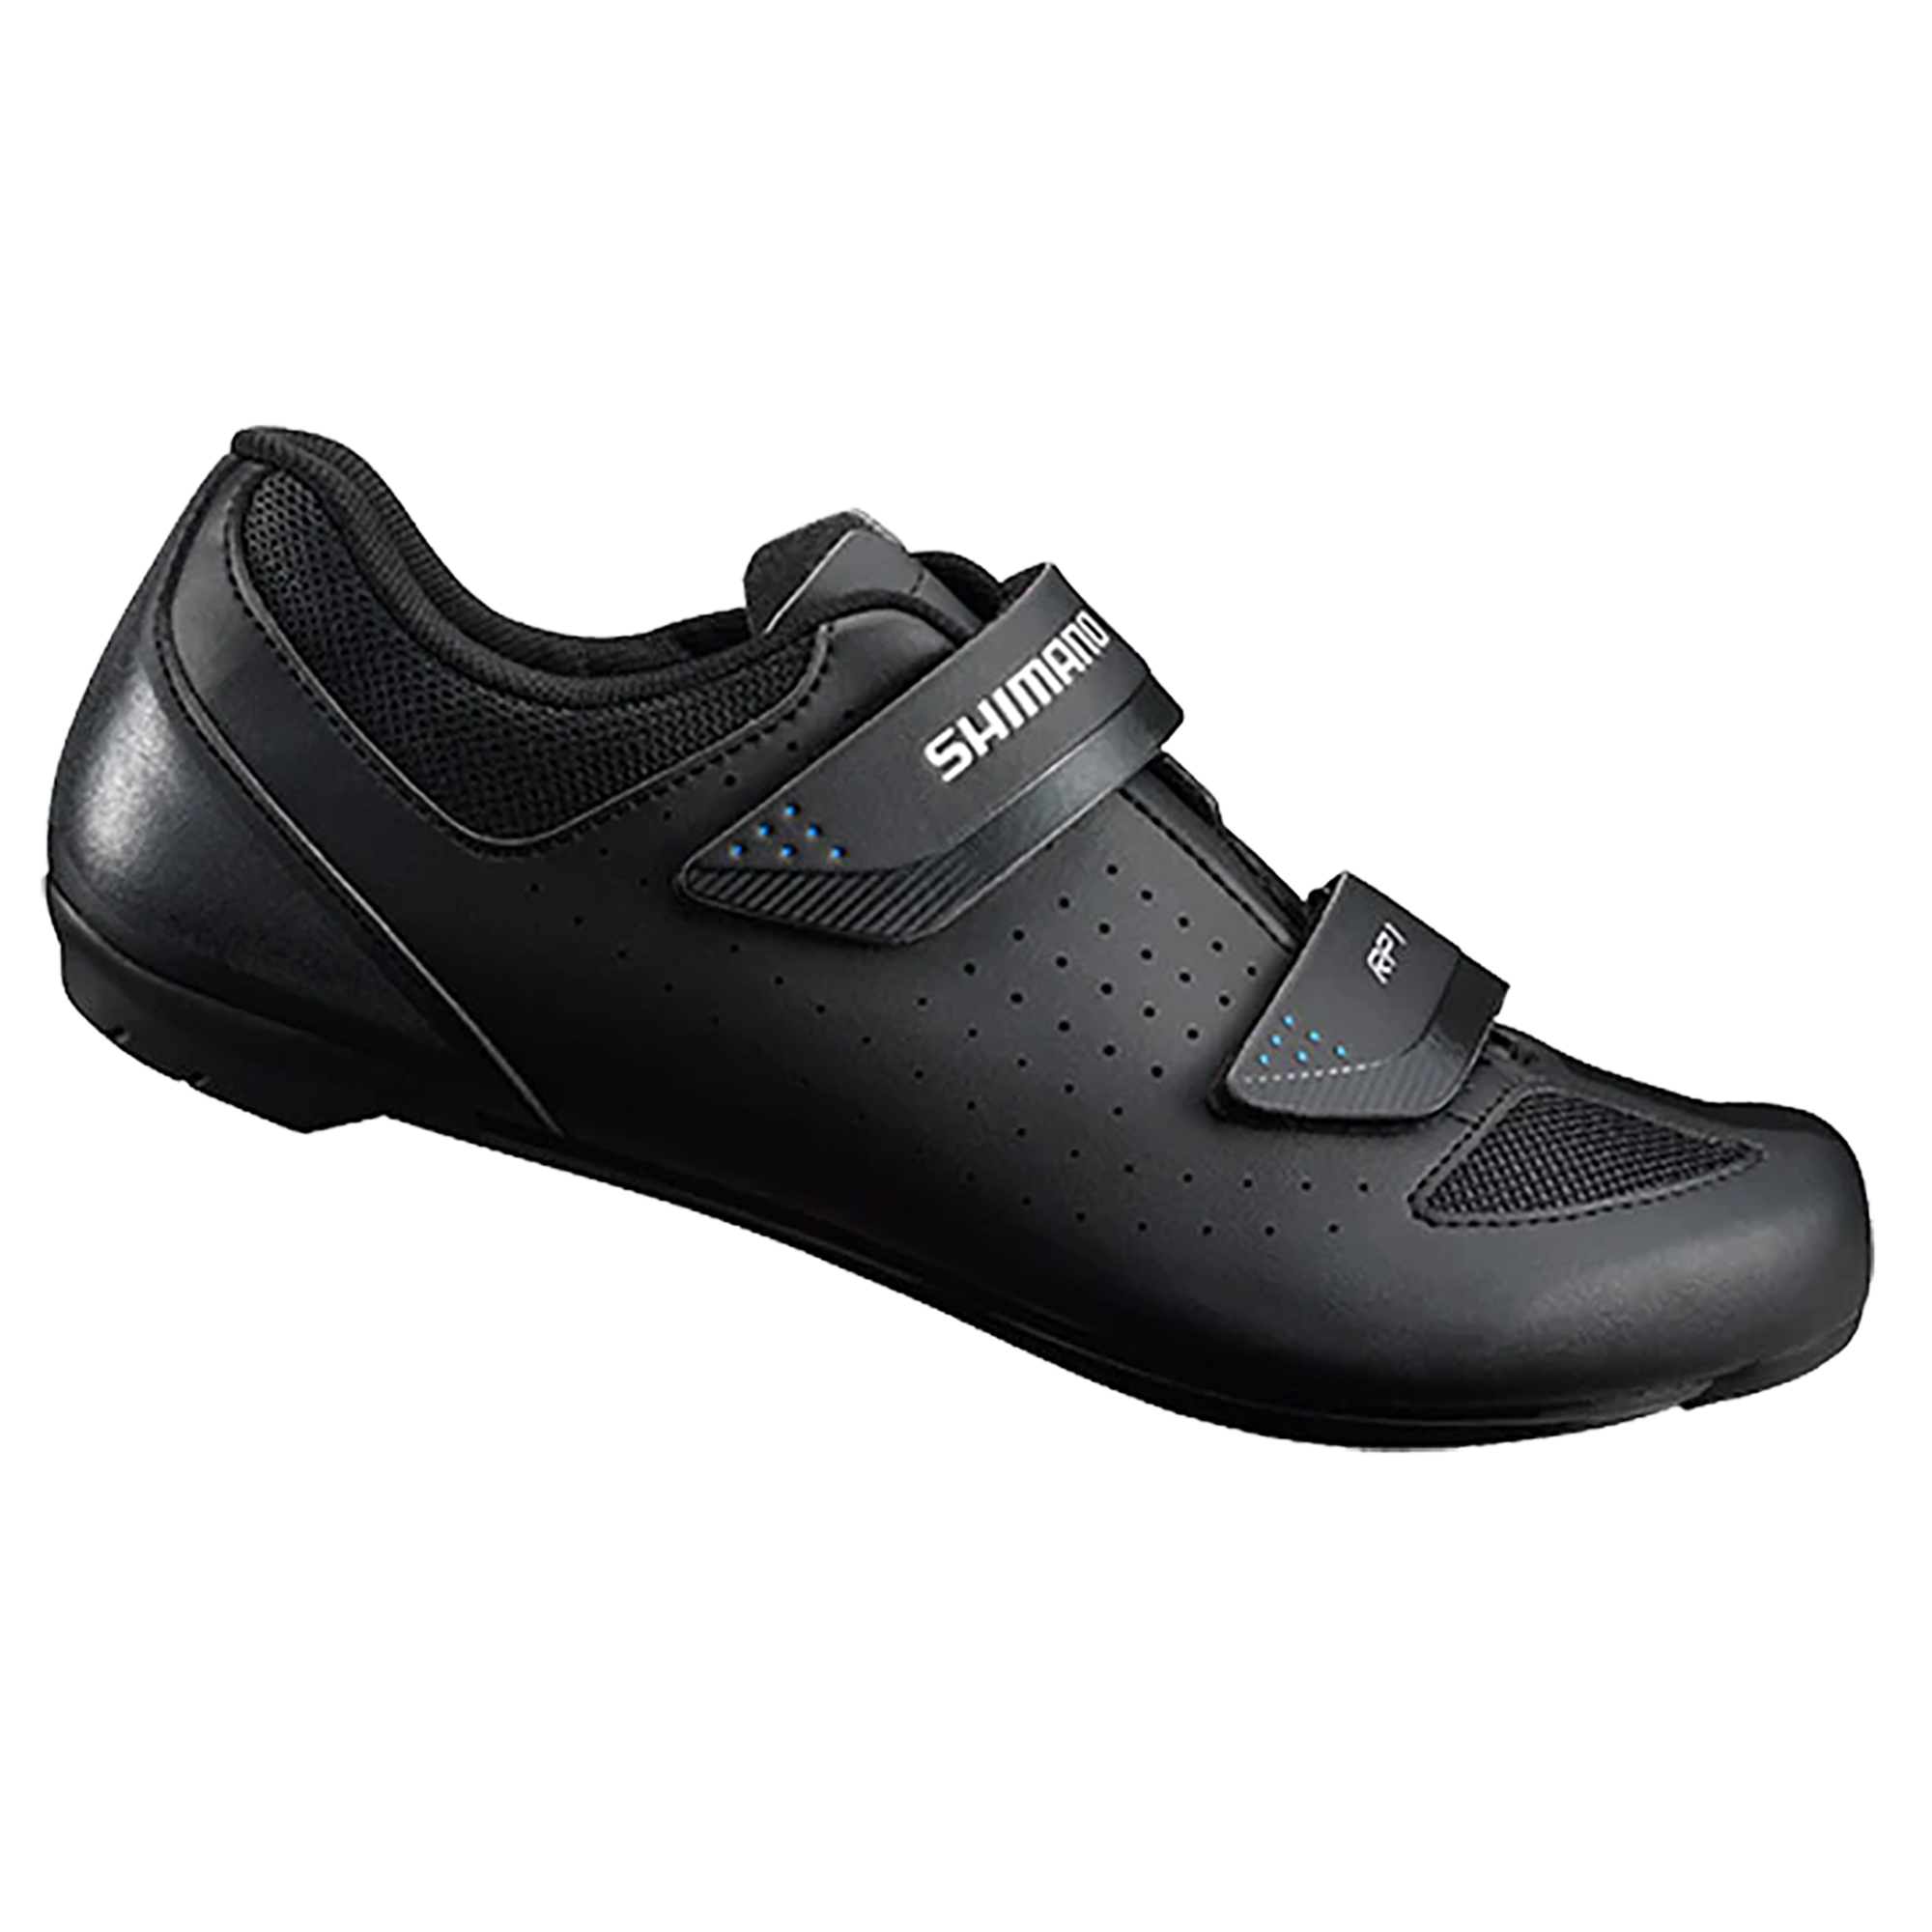 Shimano RP1 Road Bicycle Shoes For SPD SL Black Size 43